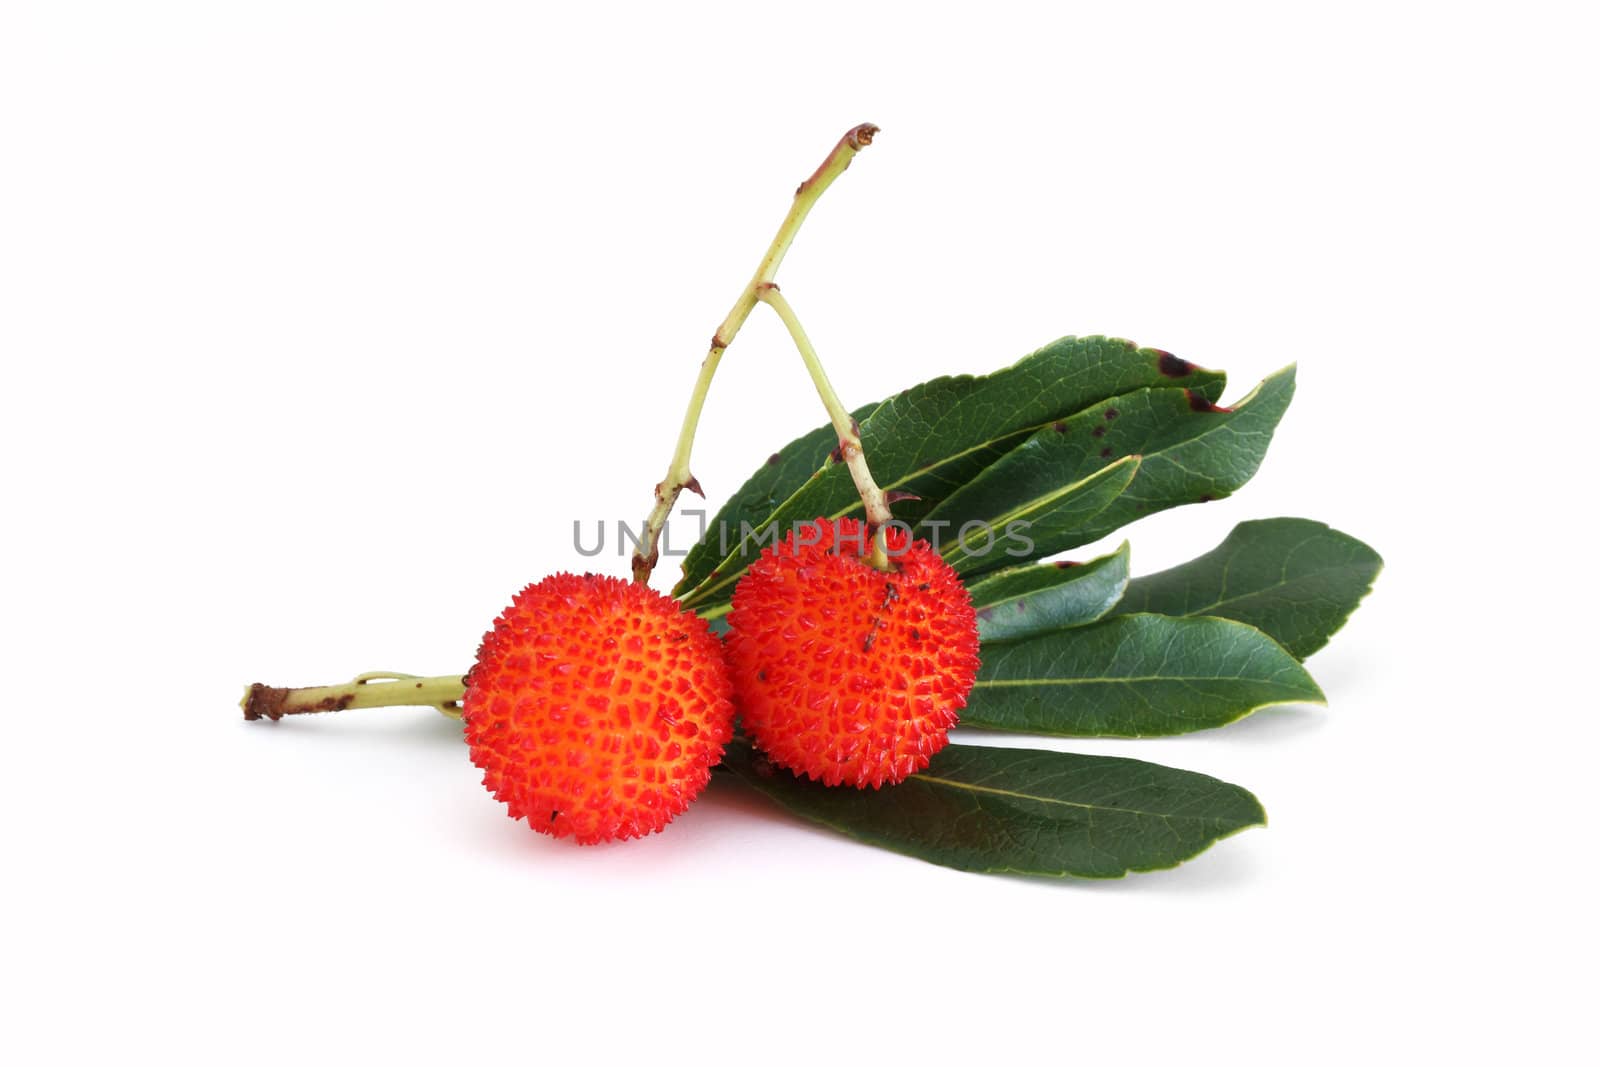 two arbutus fruits with leaves over white background